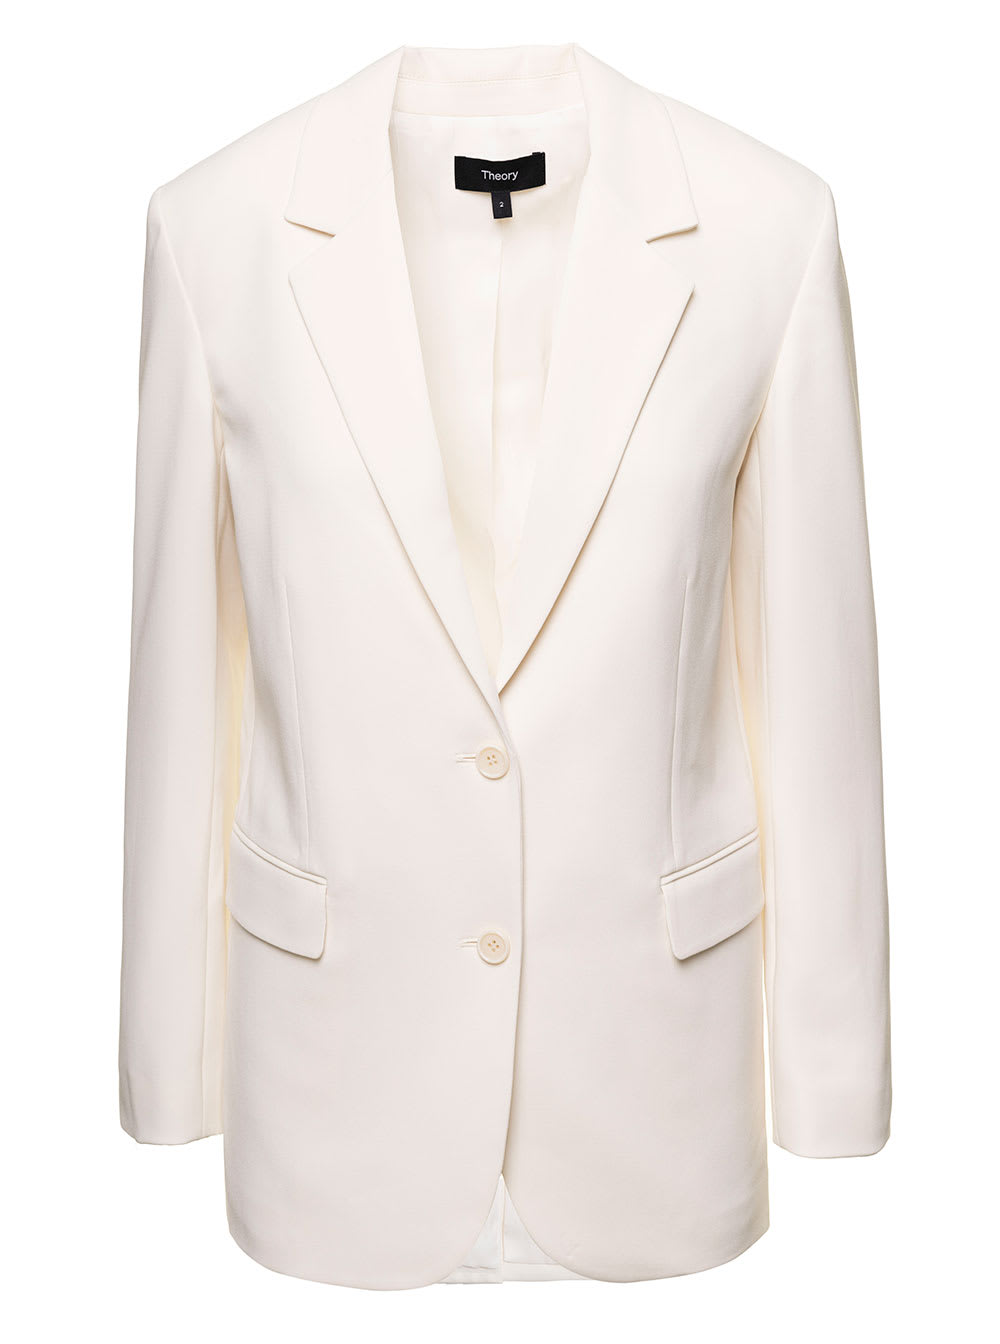 THEORY CREPE DOUBLE BREASTED BLAZER